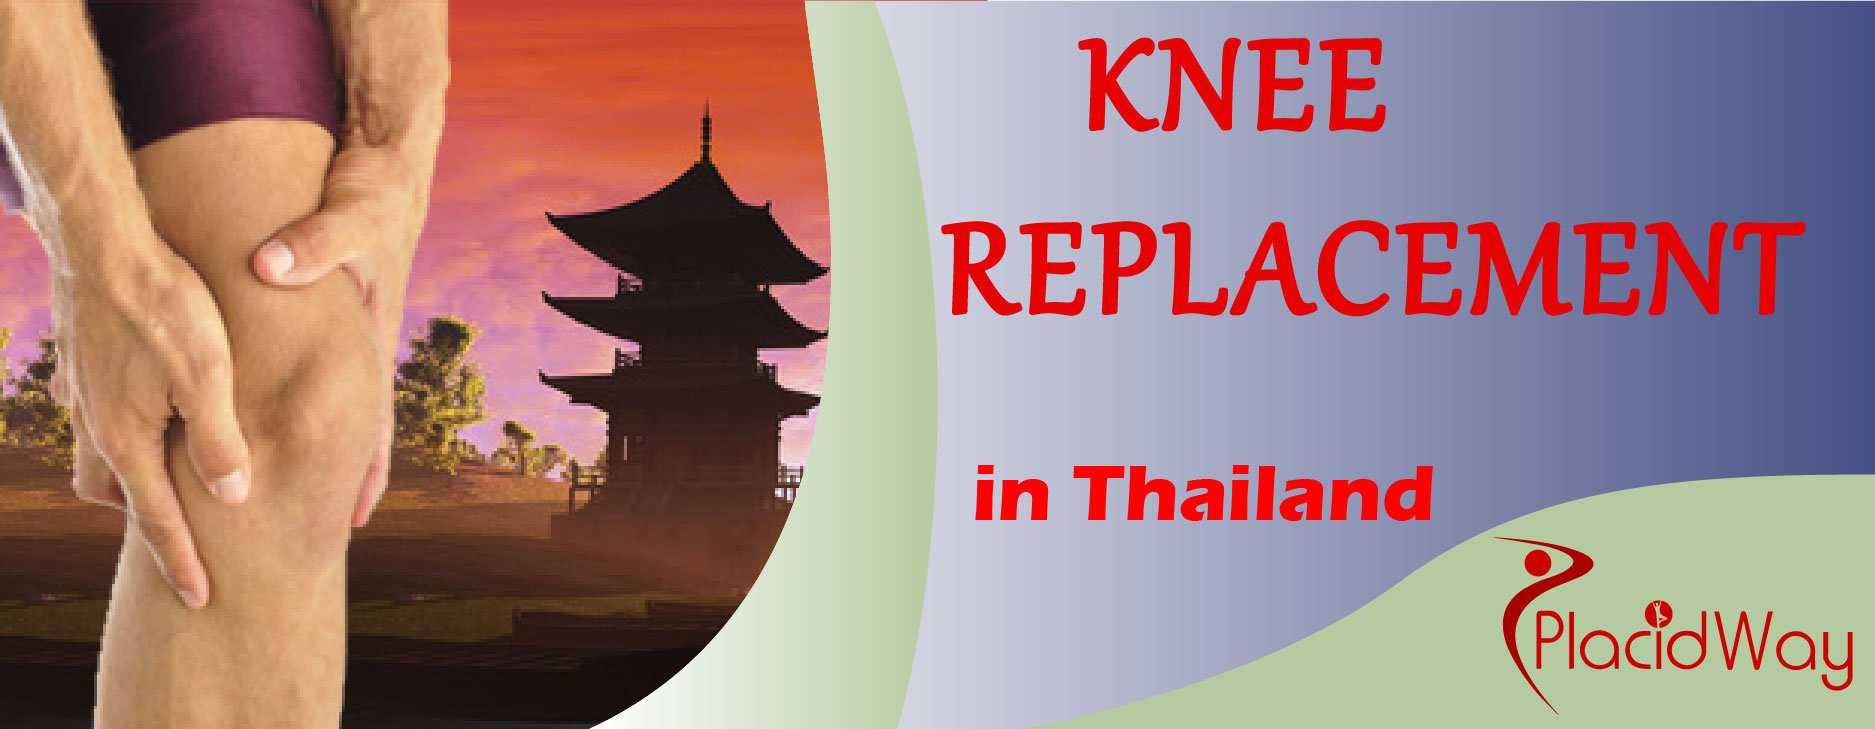 Knee Replacement in Thailand, Orthopedic Surgery in Thailand